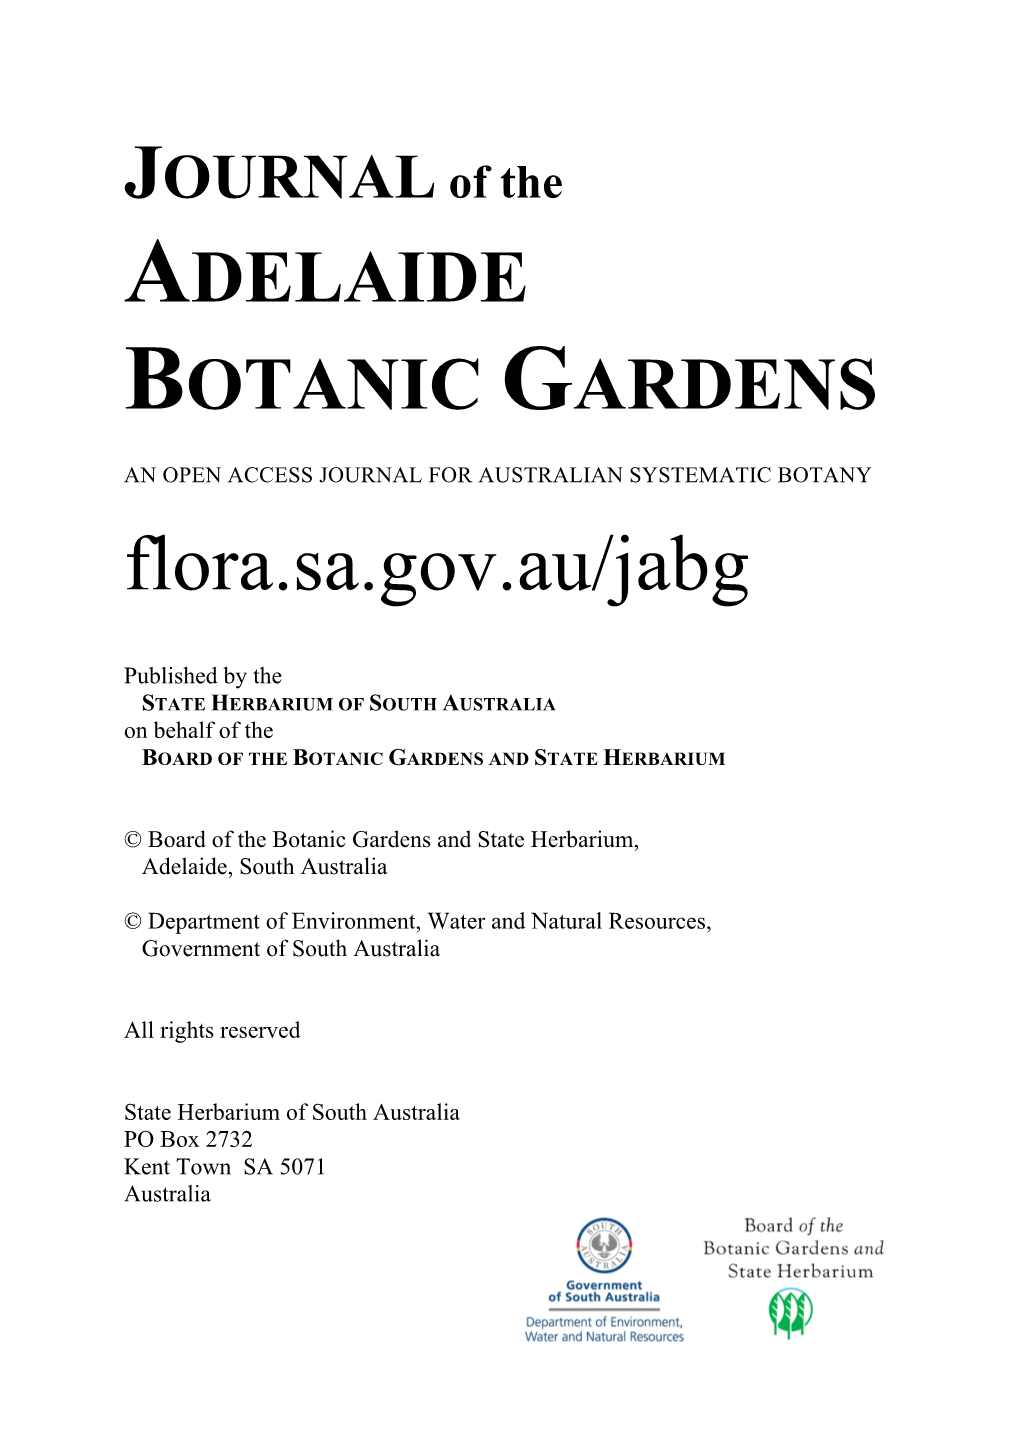 Notes on the South Australian Flora